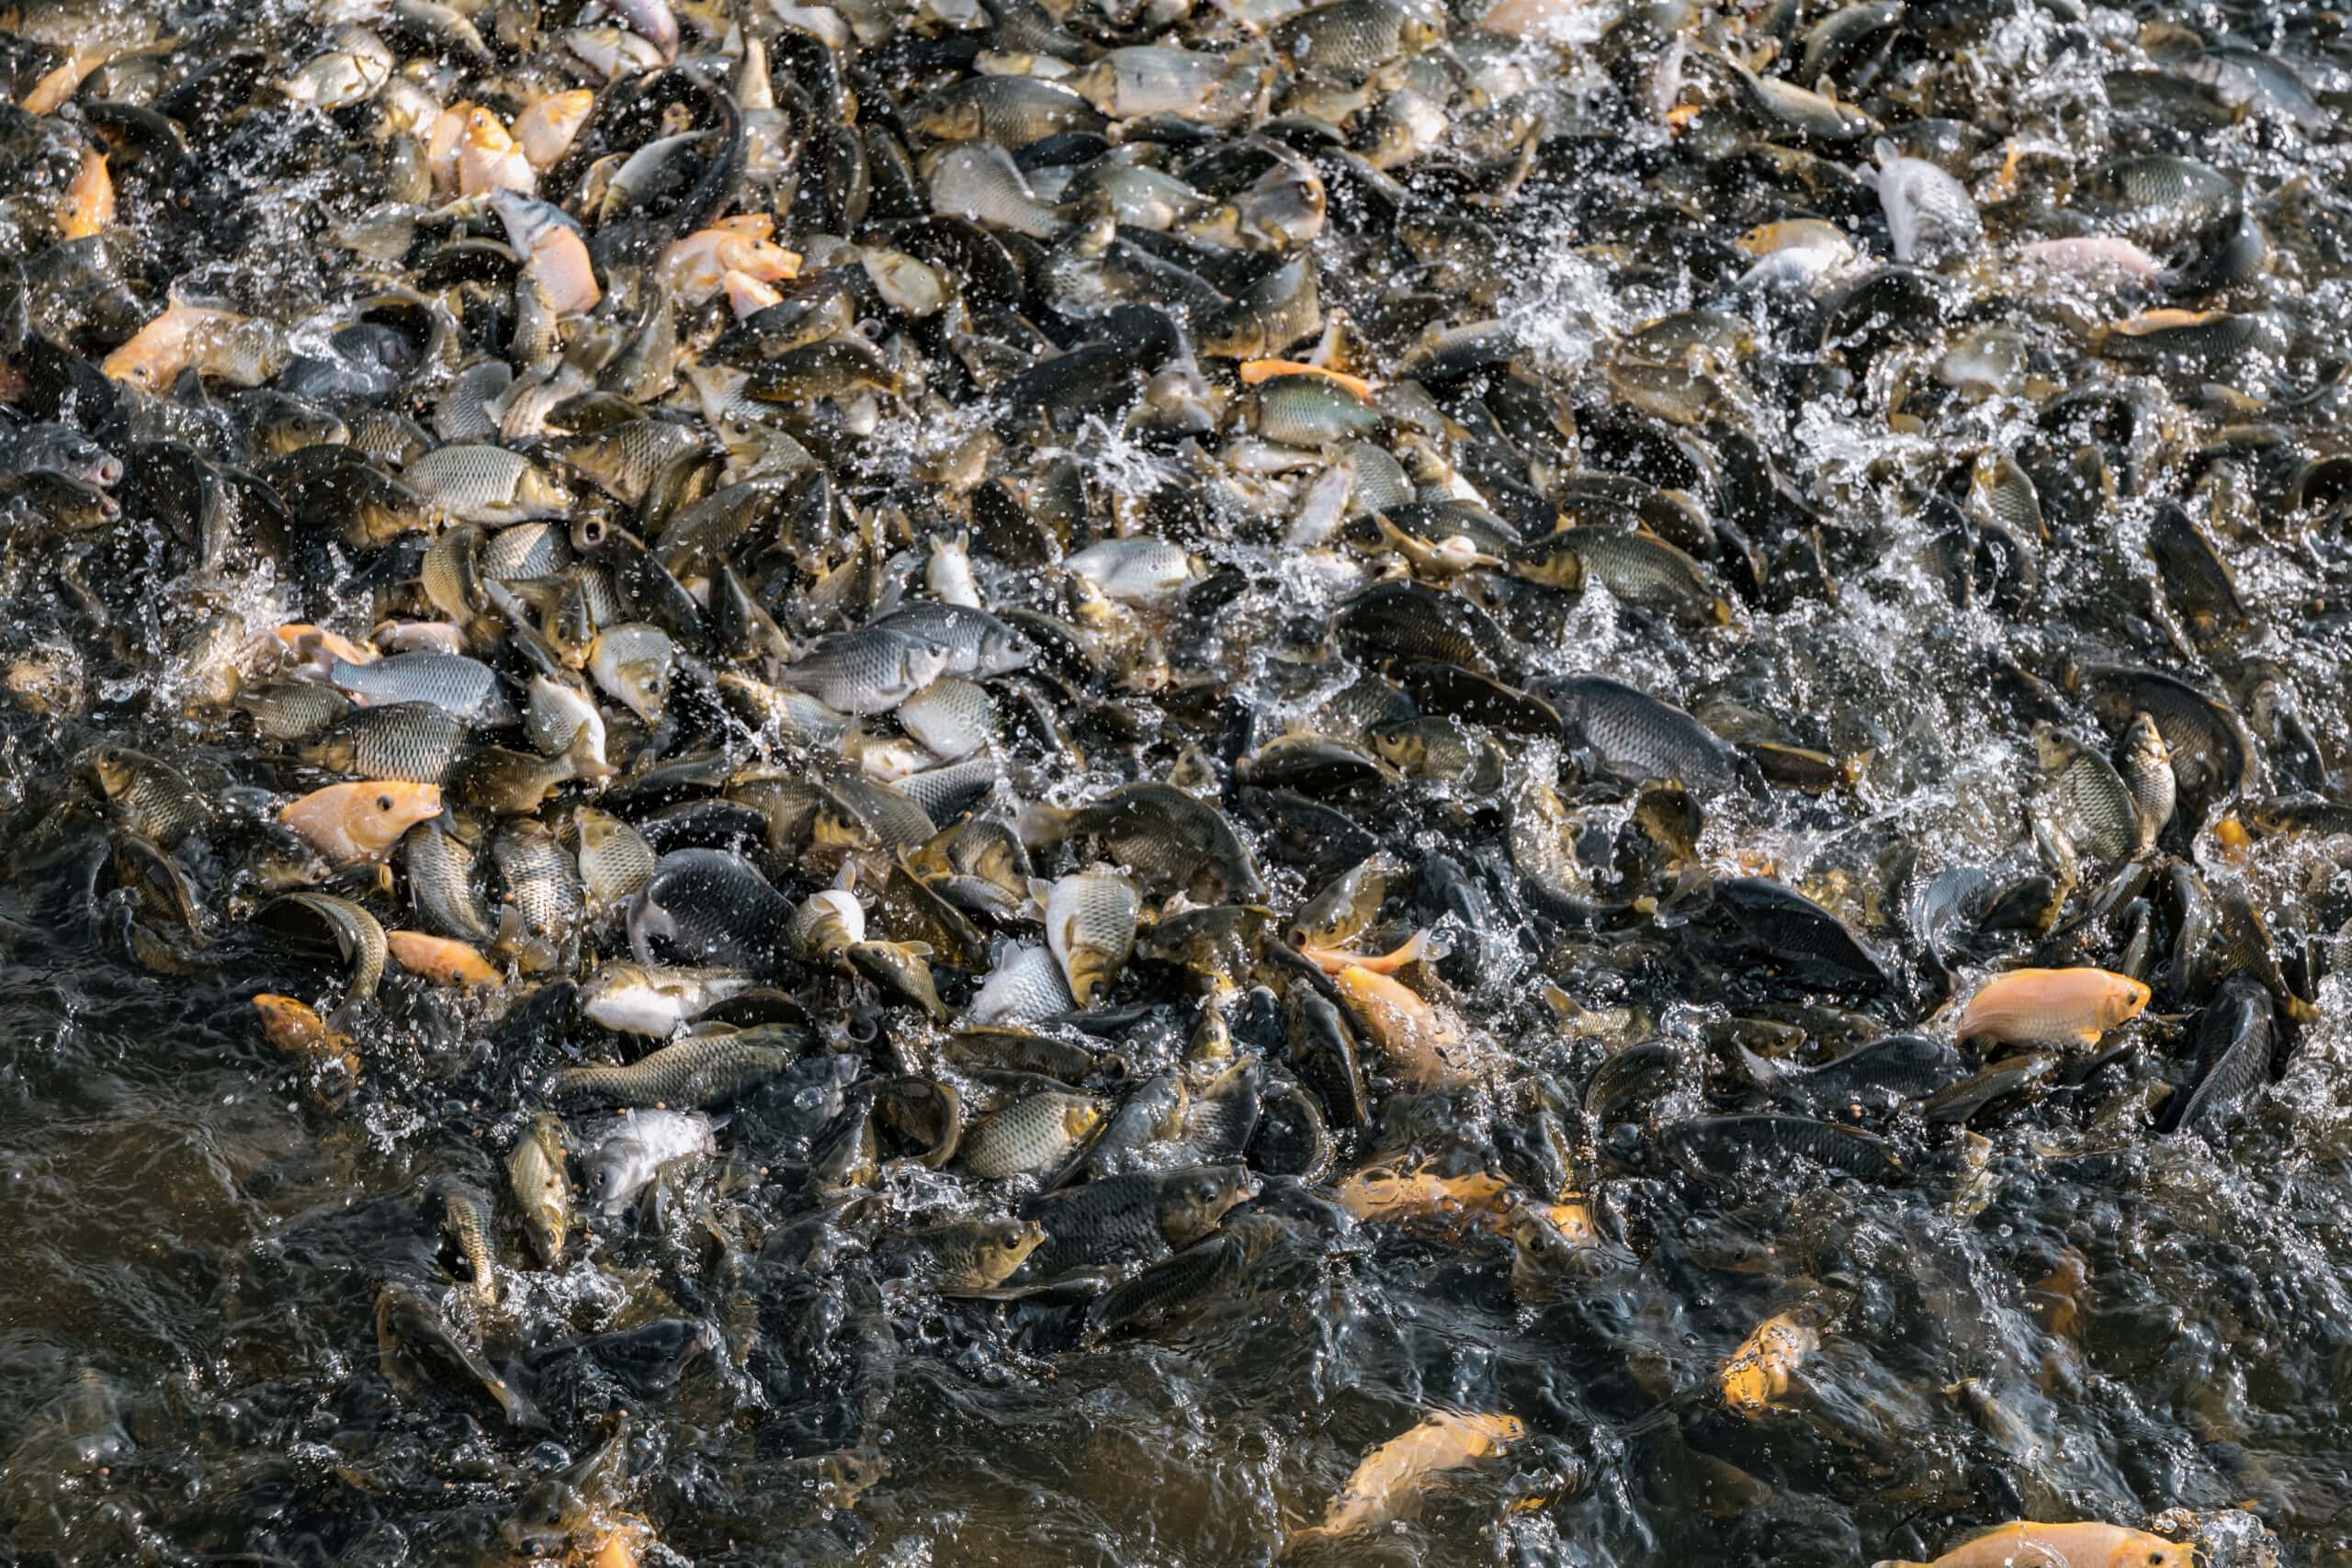 A Large Group Of Carp Splash At The Water's Surface As They Feed And Fight For Food Pellets Inside A Floating Cage. The Animals Are Being Raised For Food At An Indonesian Fish Farm Located On A Freshwater Reservoir.